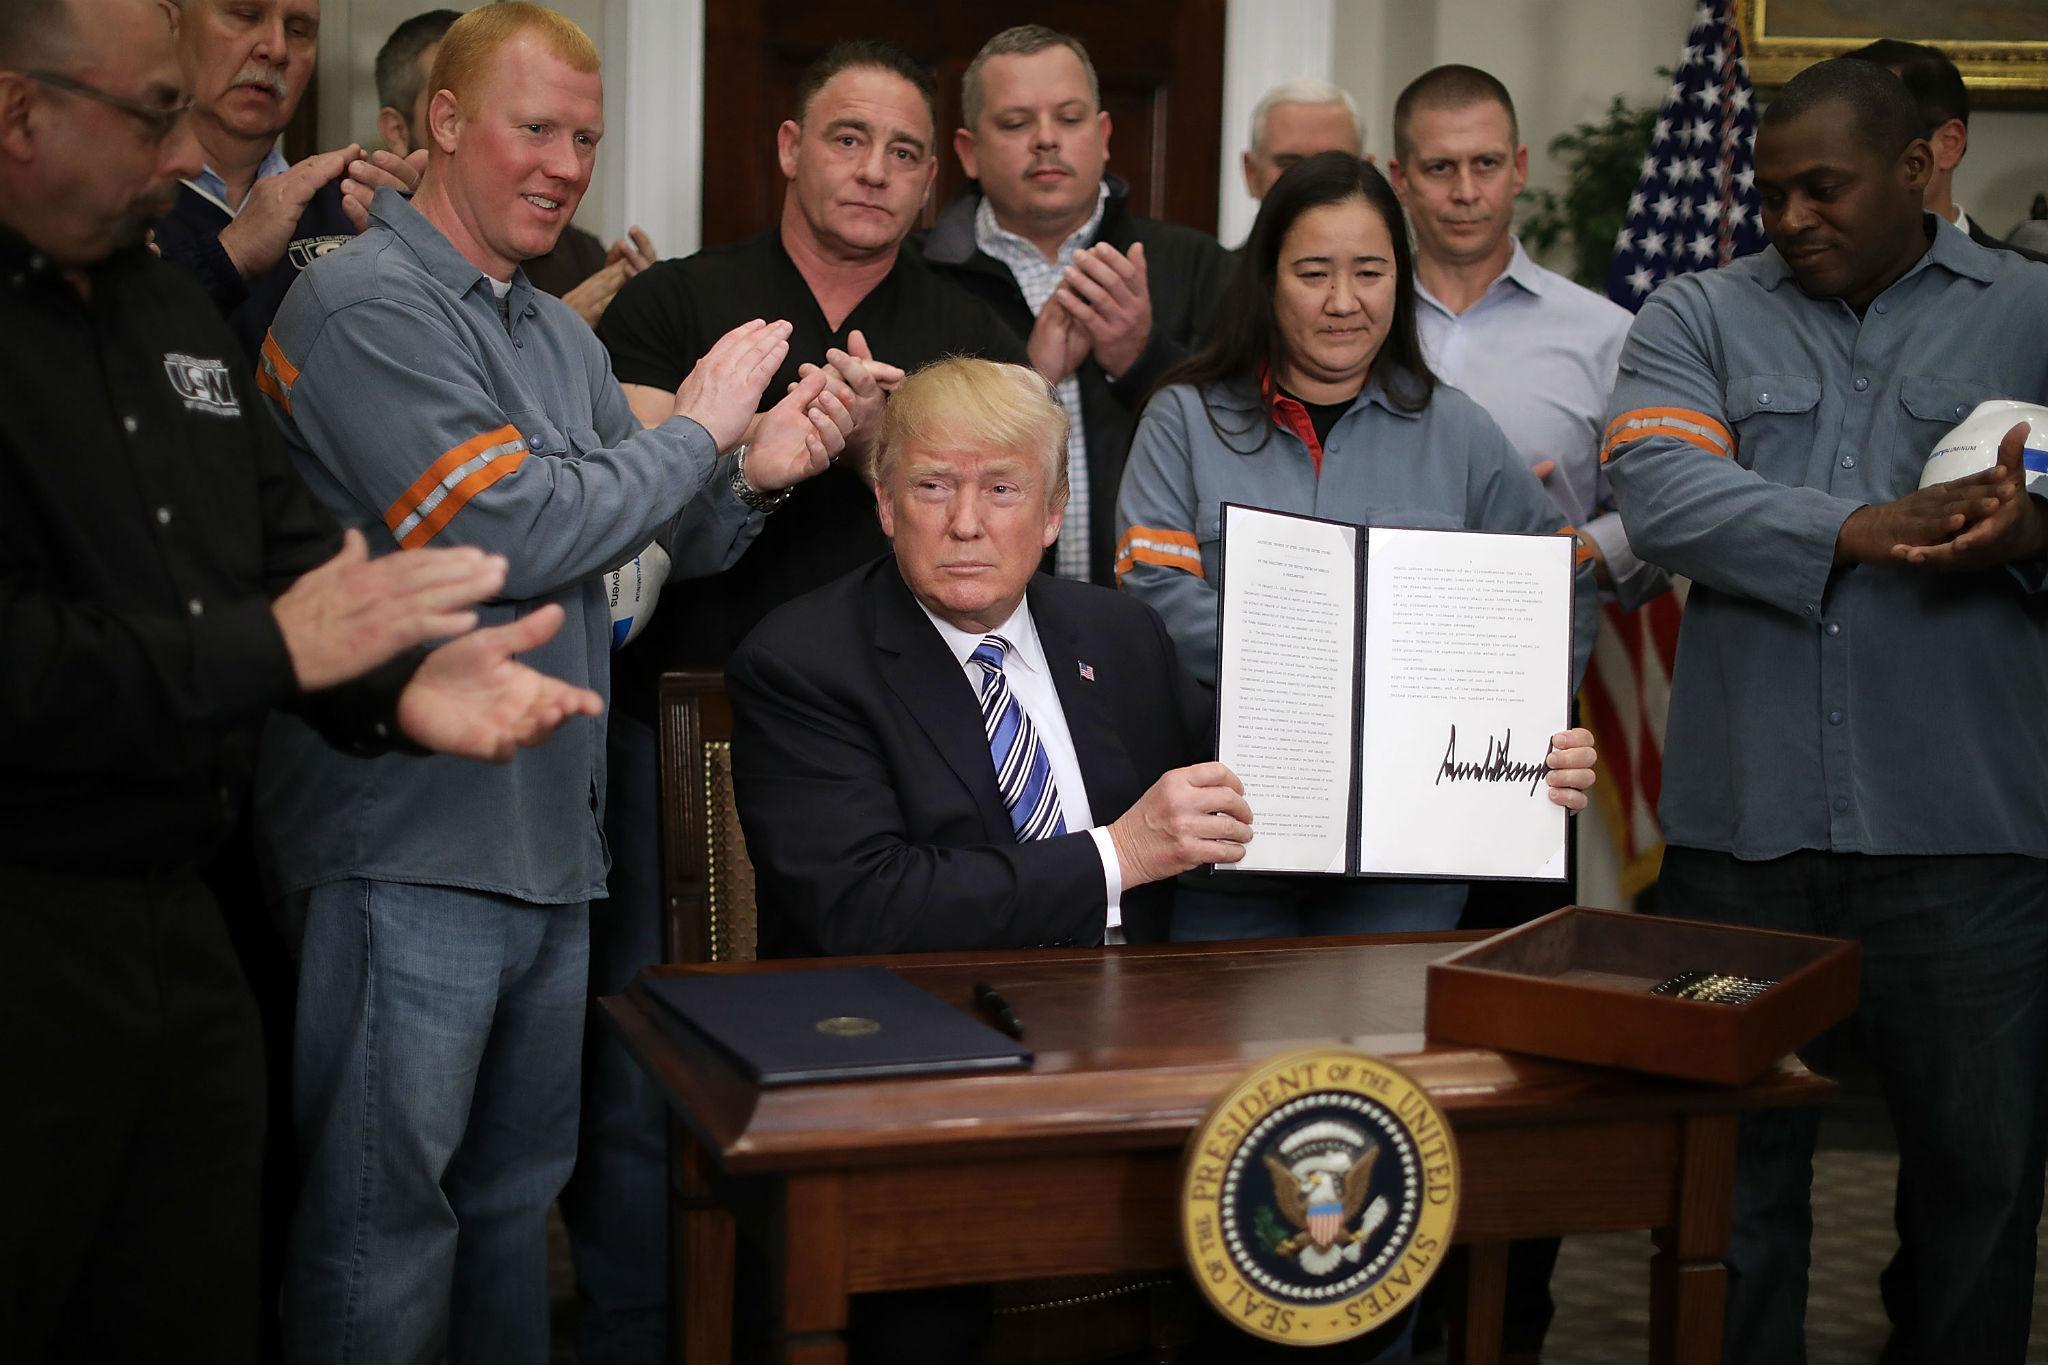 Surrounded by industry workers, Trump signs ‘Section 232 Proclamations’ on steel imports